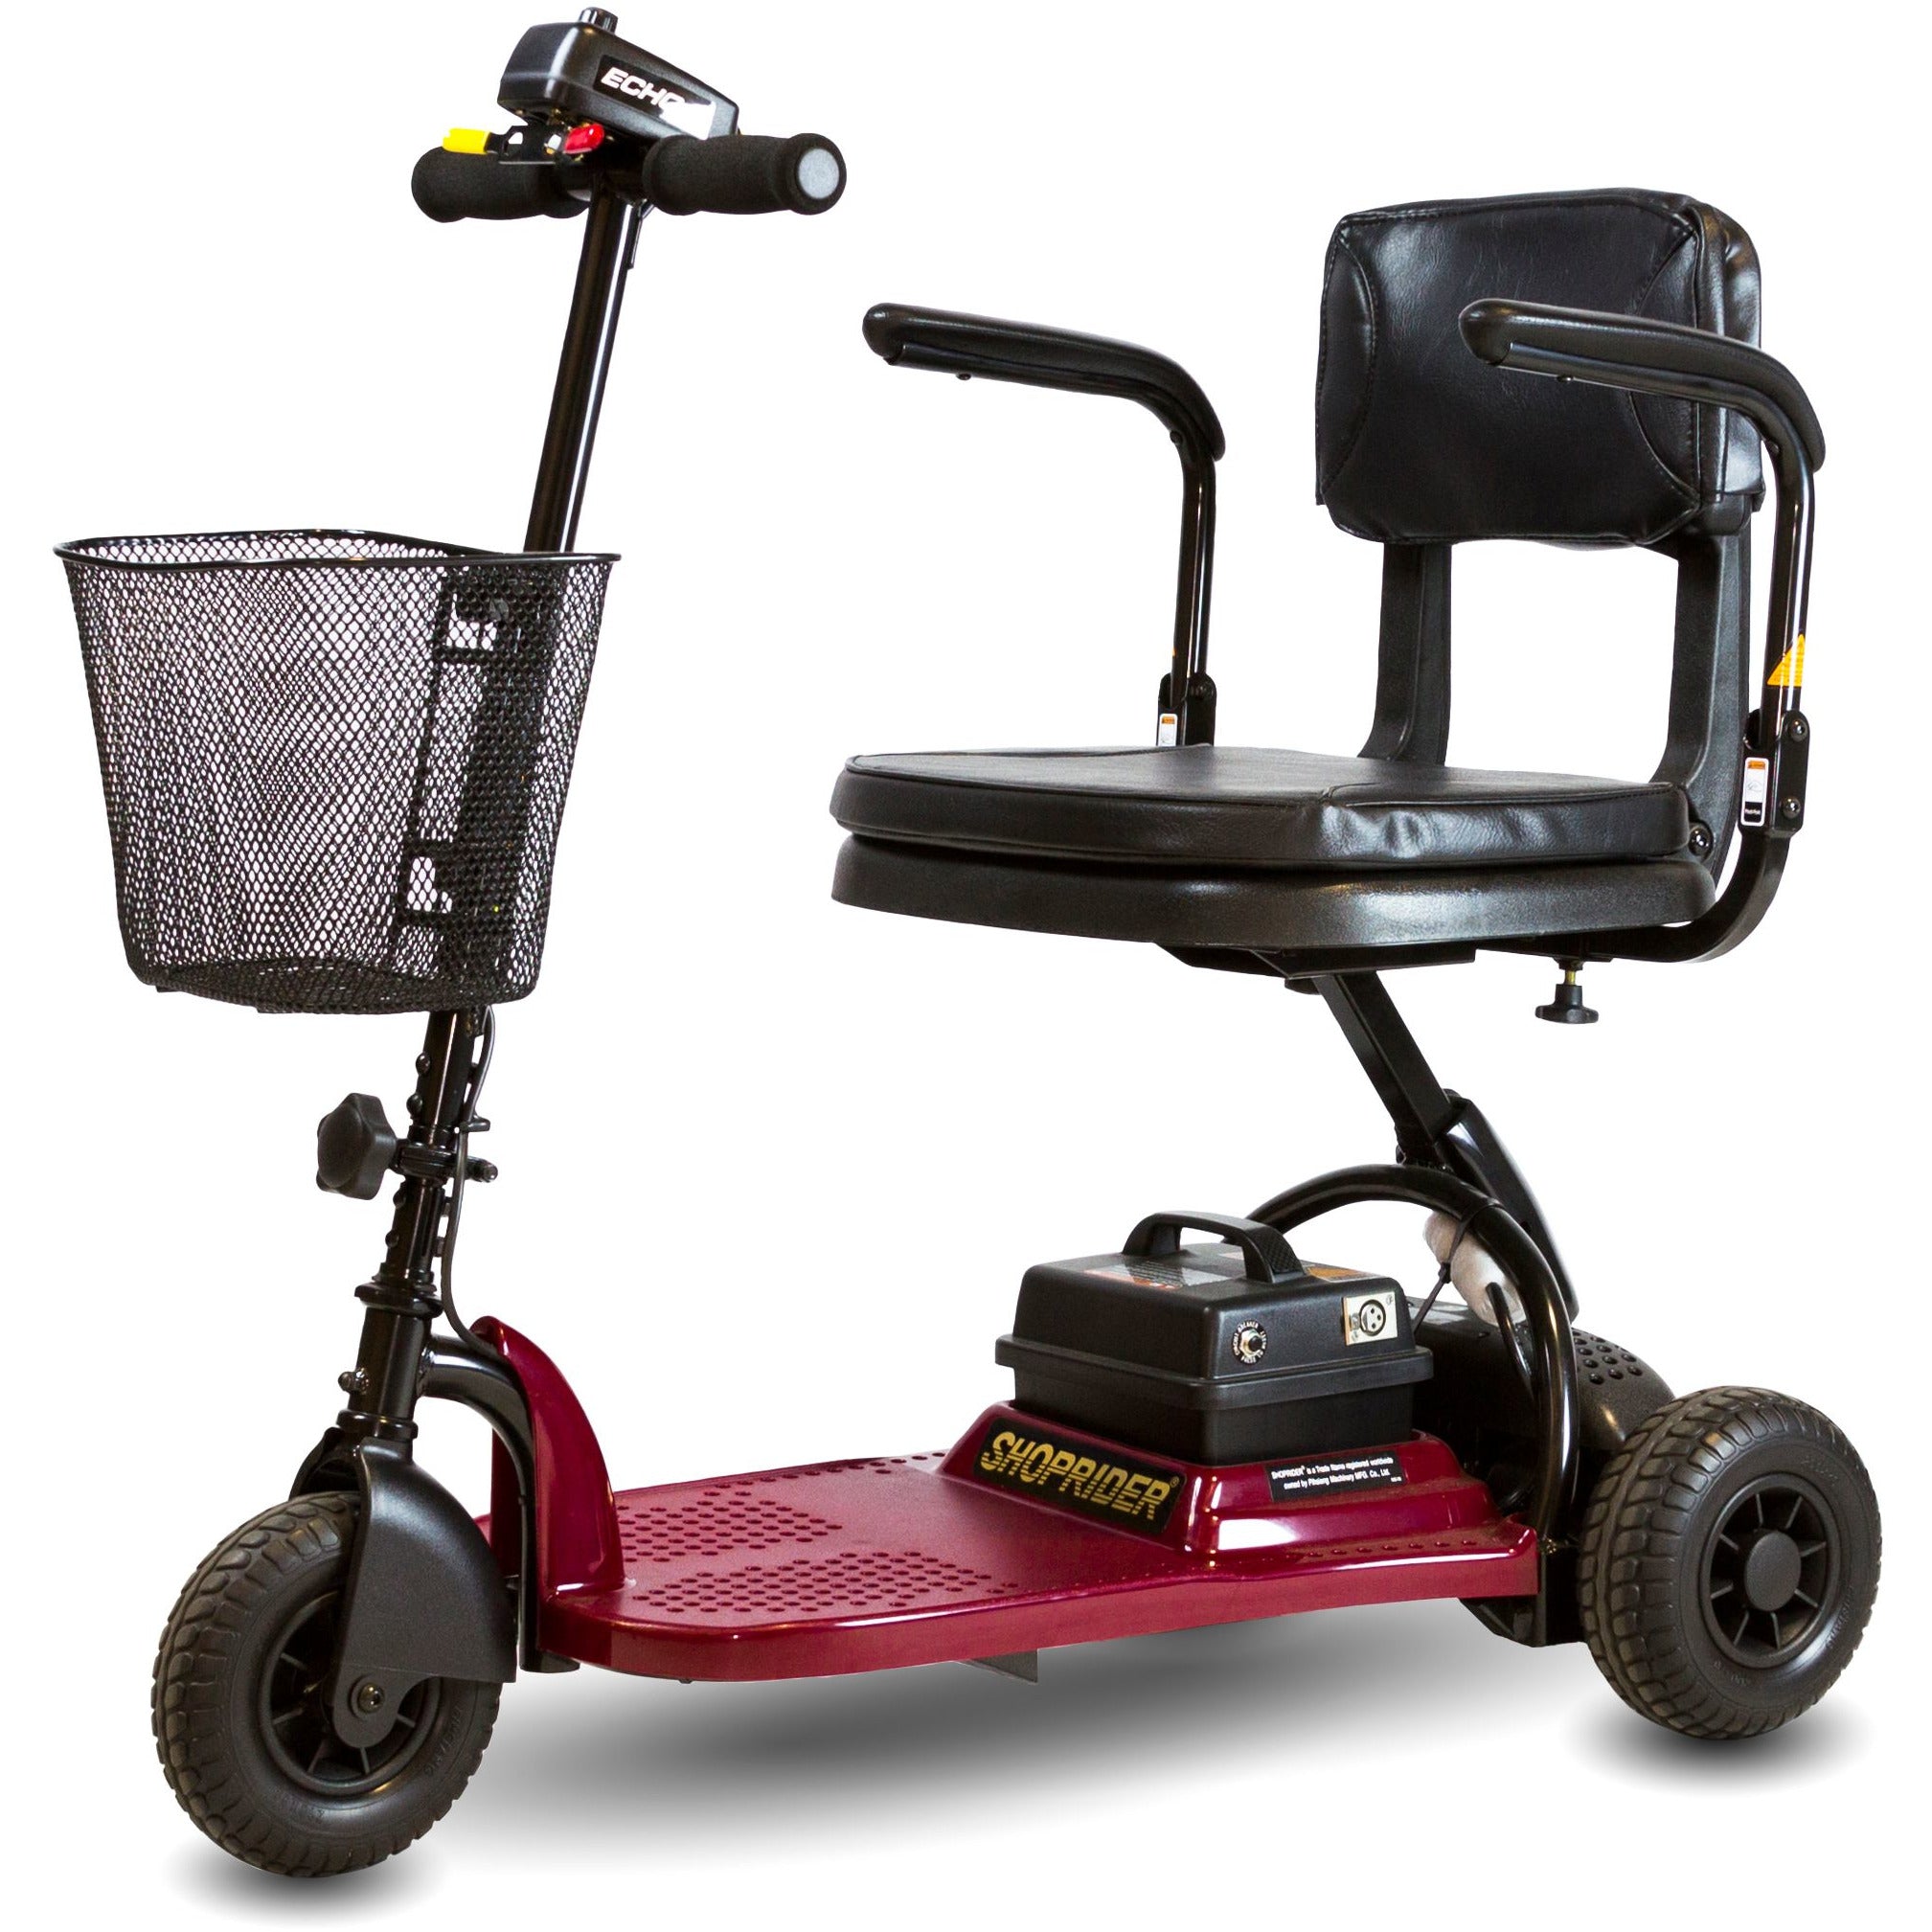 https://cdn.shopifycdn.net/s/files/1/0273/7691/0433/products/shoprider-echo-3-mid-size-three-wheel-mobility-scooter-sl73-16041040642145.jpg?v=1616612043